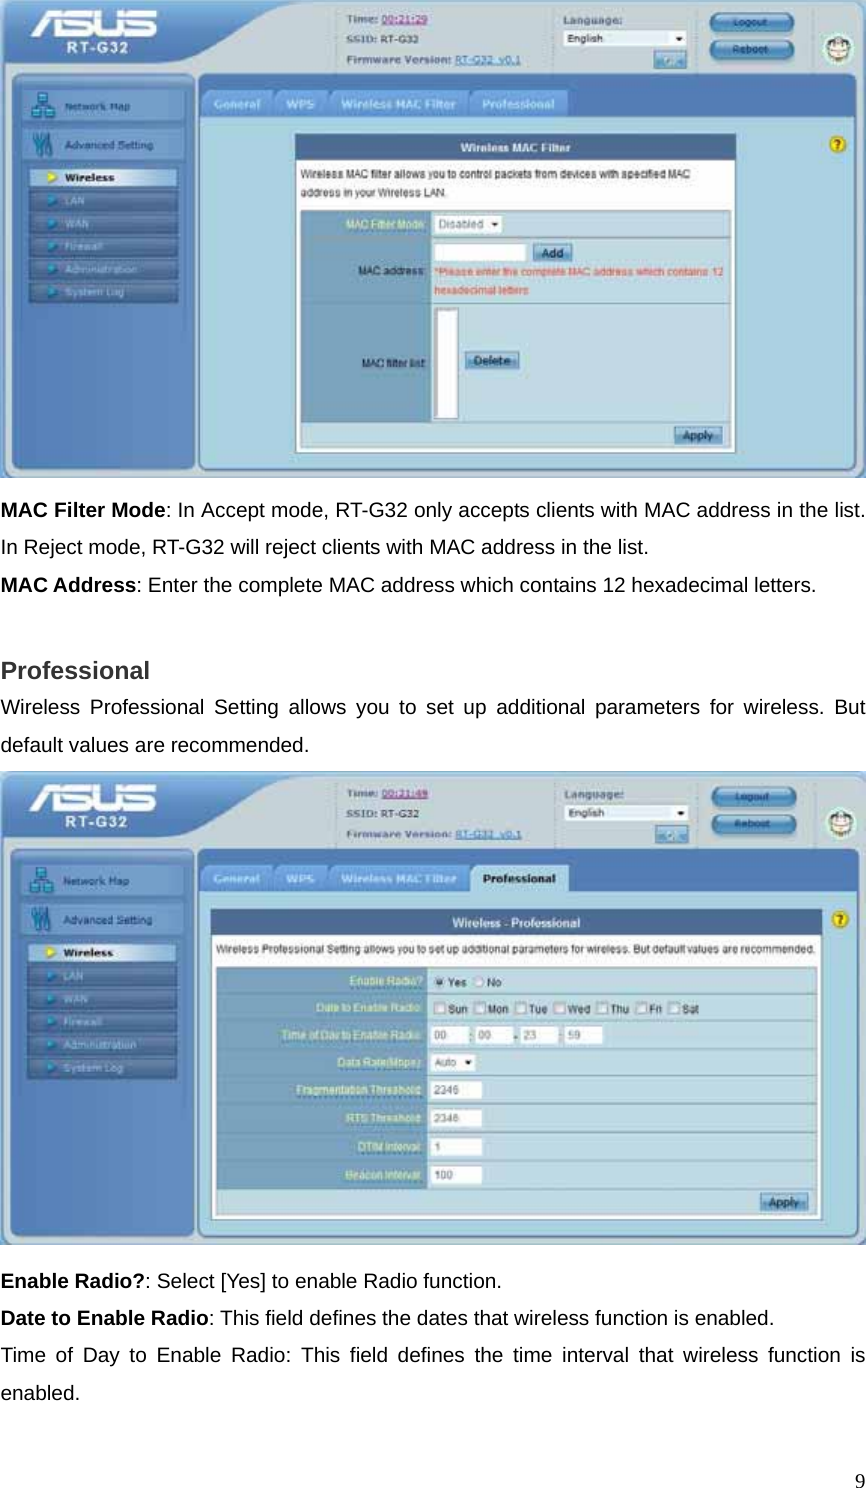  9 MAC Filter Mode: In Accept mode, RT-G32 only accepts clients with MAC address in the list. In Reject mode, RT-G32 will reject clients with MAC address in the list. MAC Address: Enter the complete MAC address which contains 12 hexadecimal letters.  Professional Wireless Professional Setting allows you to set up additional parameters for wireless. But default values are recommended.  Enable Radio?: Select [Yes] to enable Radio function. Date to Enable Radio: This field defines the dates that wireless function is enabled. Time of Day to Enable Radio: This field defines the time interval that wireless function is enabled. 